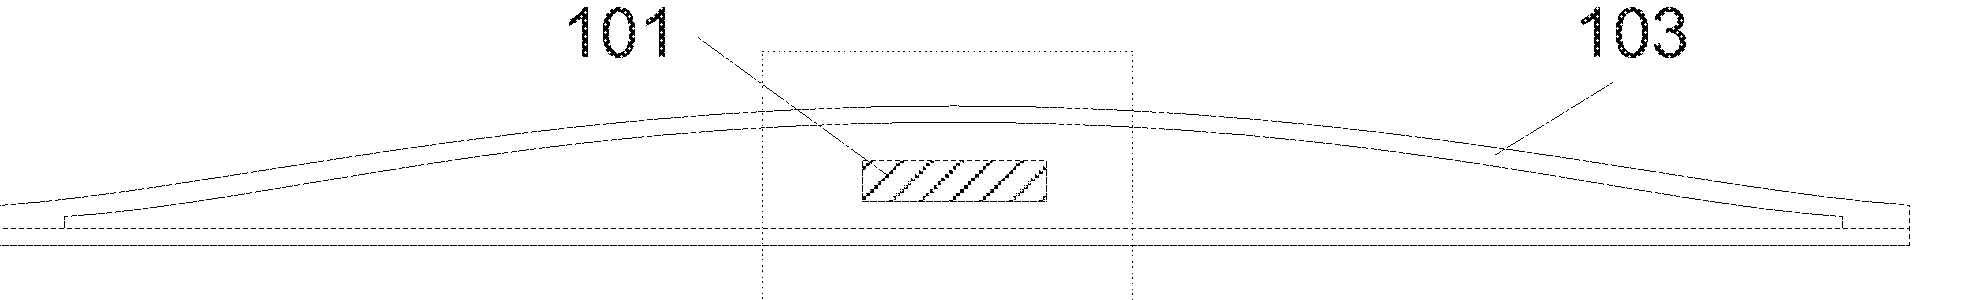 Three-Dimensional Adhesive Device Having a Microelectronic System Embedded Therein